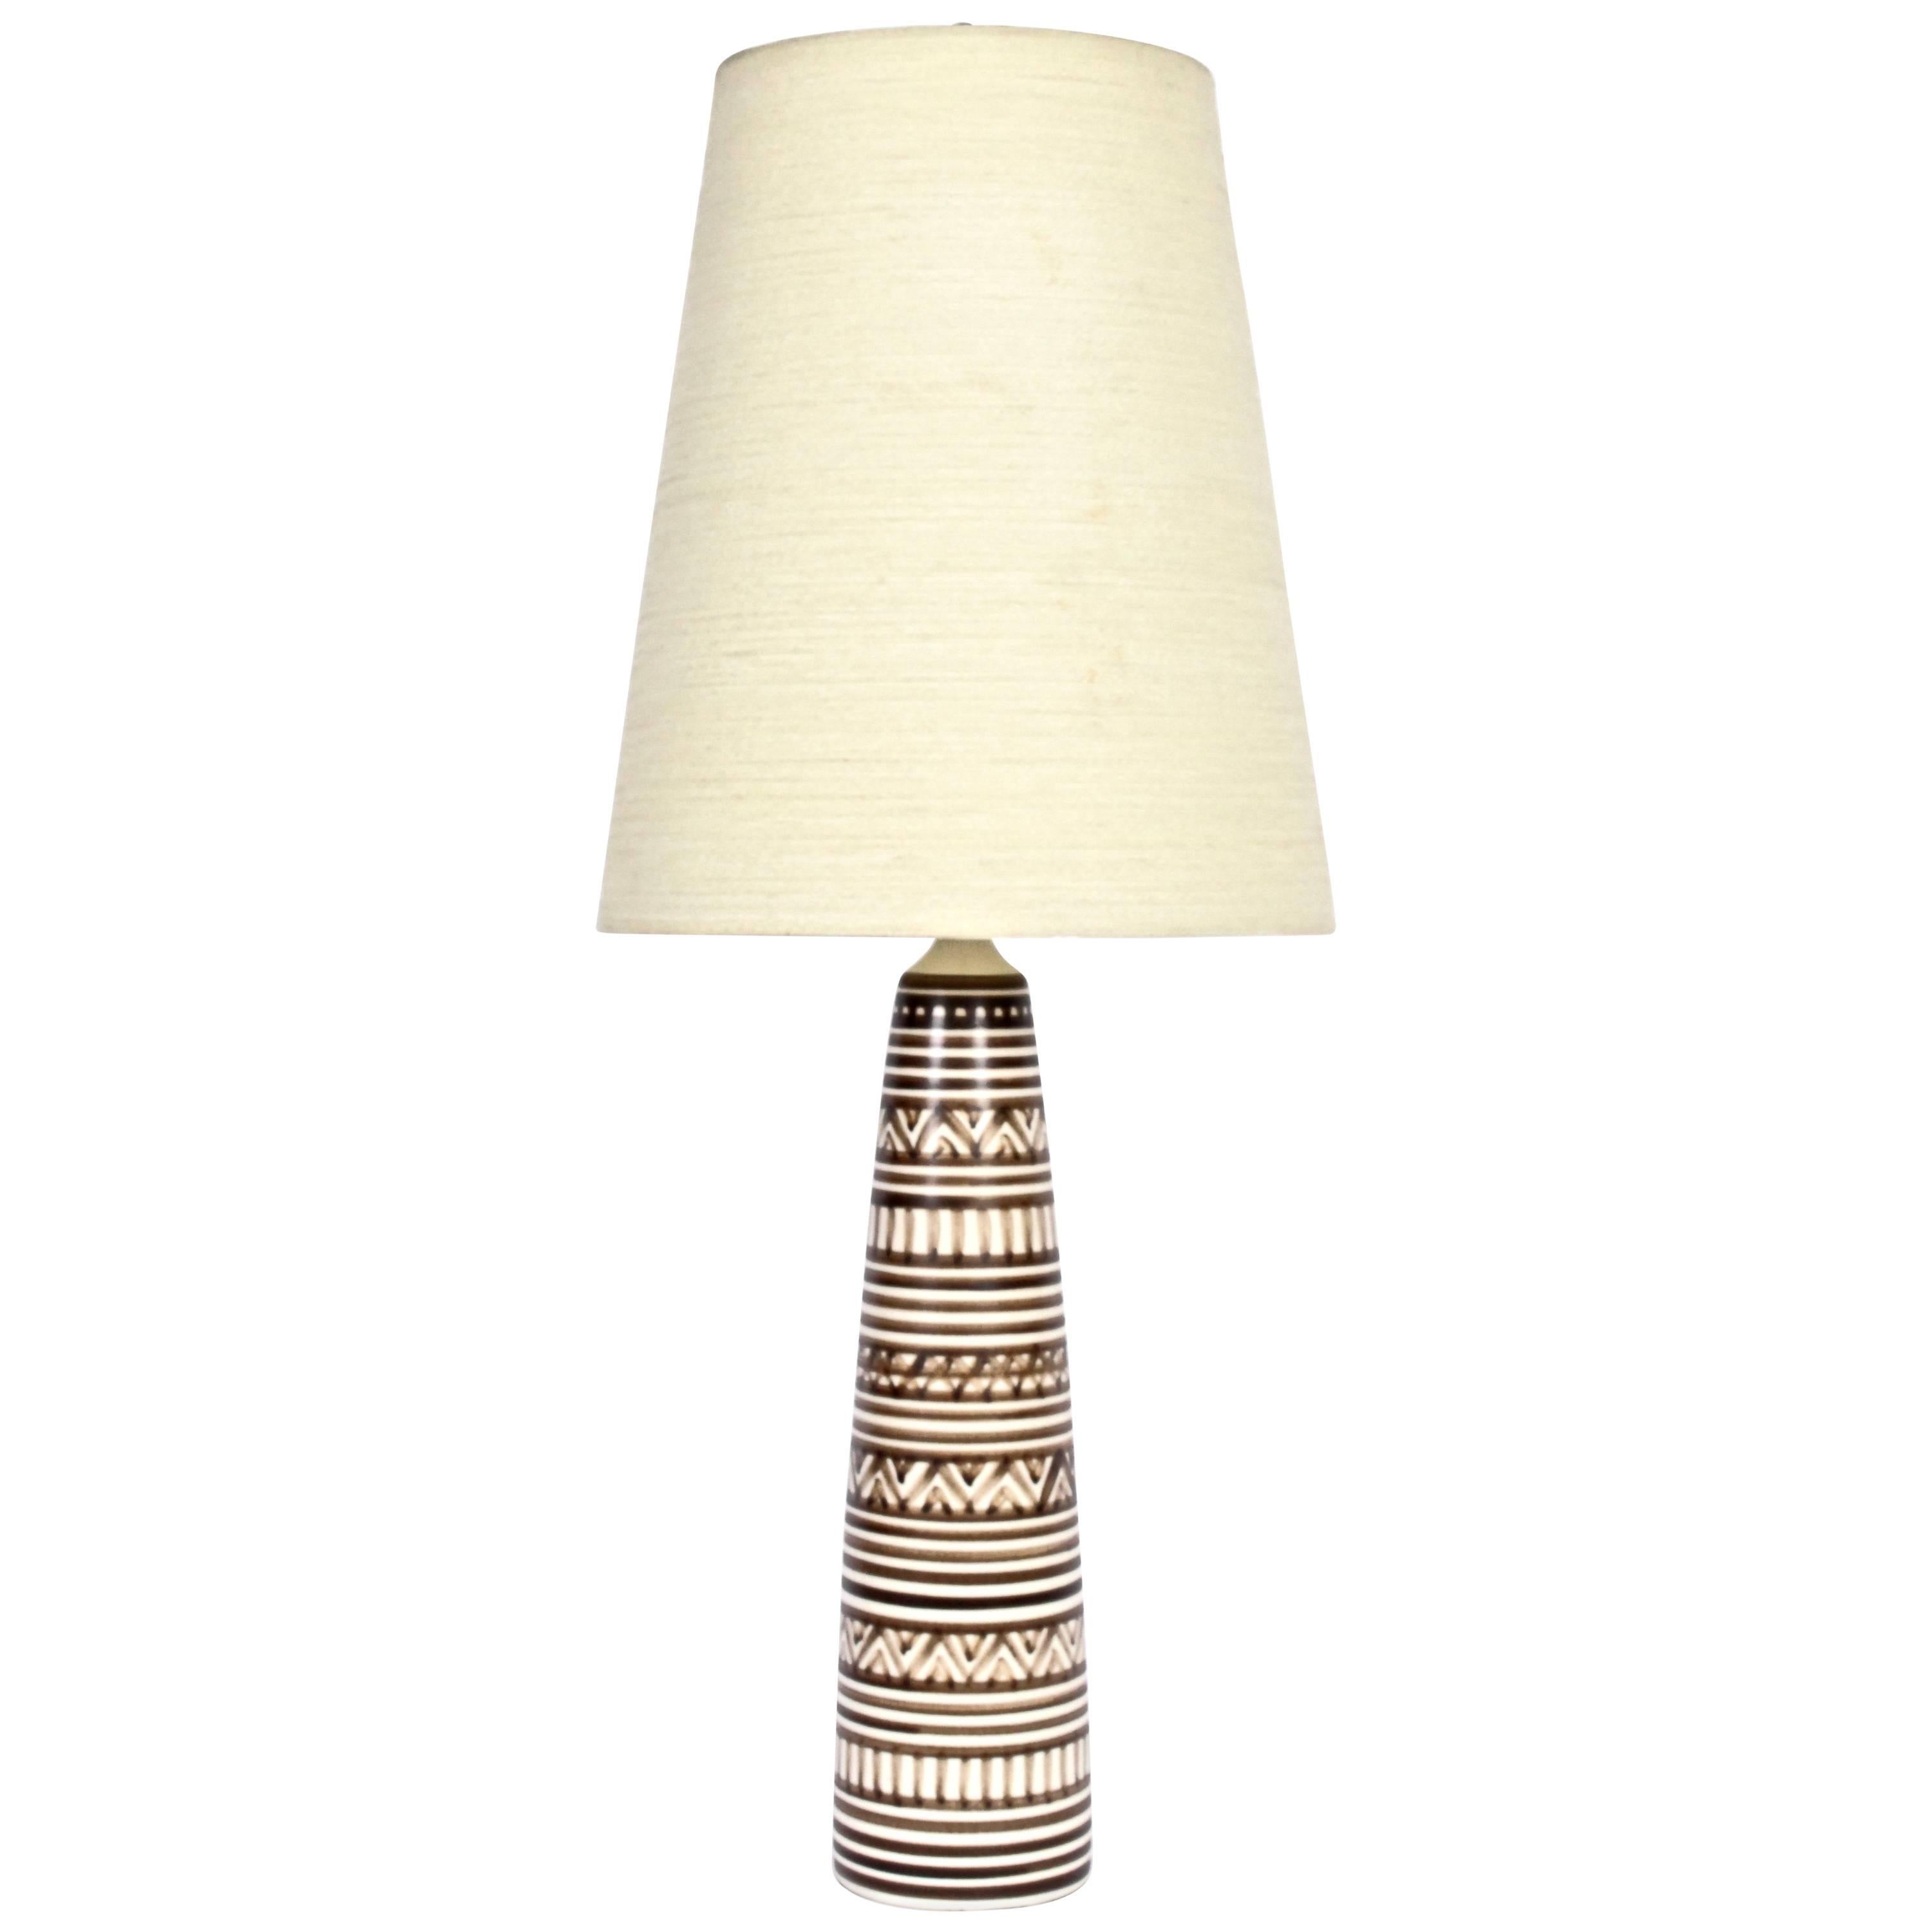 Tall Lotte and Gunnar Bostlund "Tribal" Pottery Table Lamp, 1960's For Sale